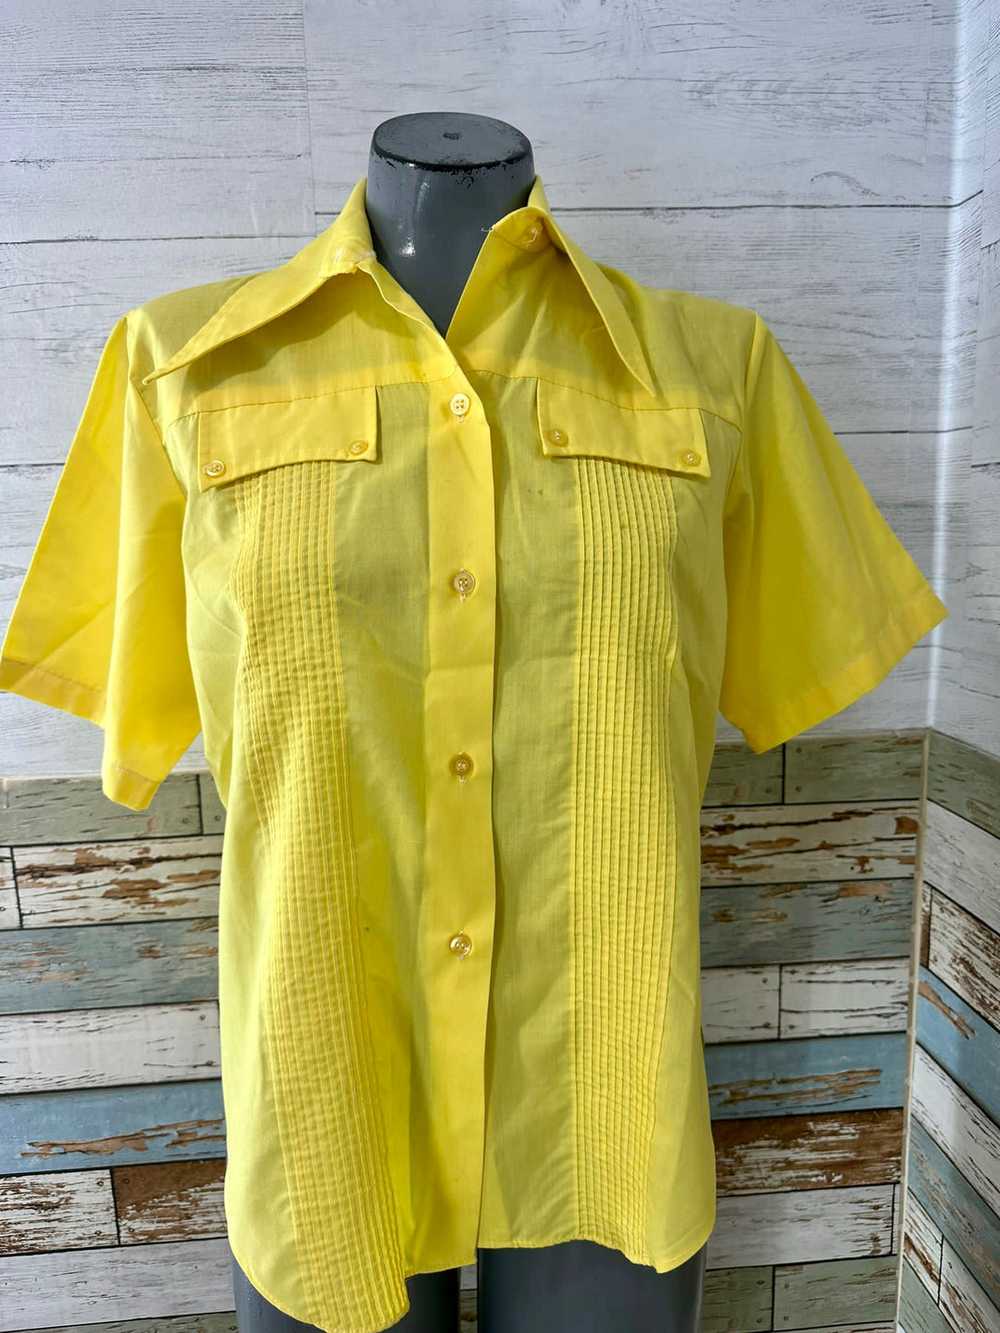 70’s Yellow Short Sleeve Shirt With Panels - image 1